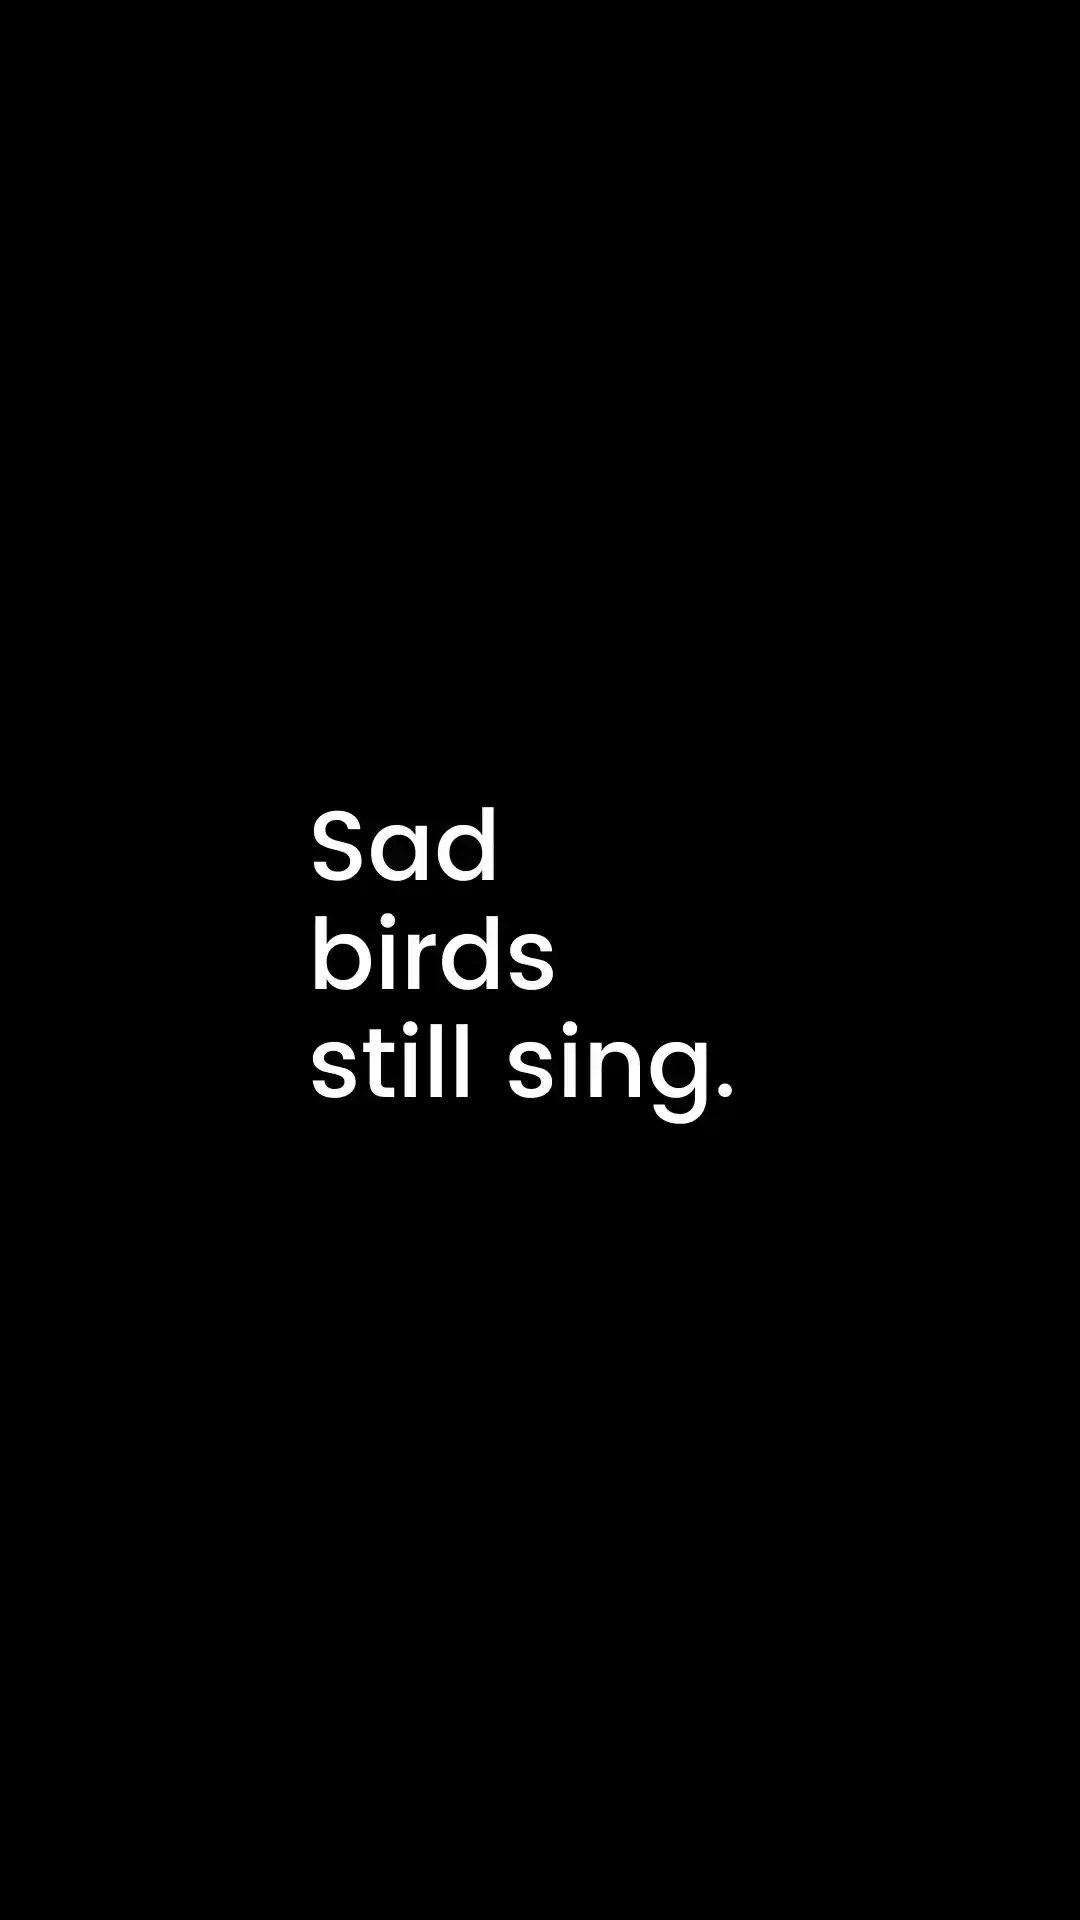 sad birds still sing sad quote wallpaper free download for mobile